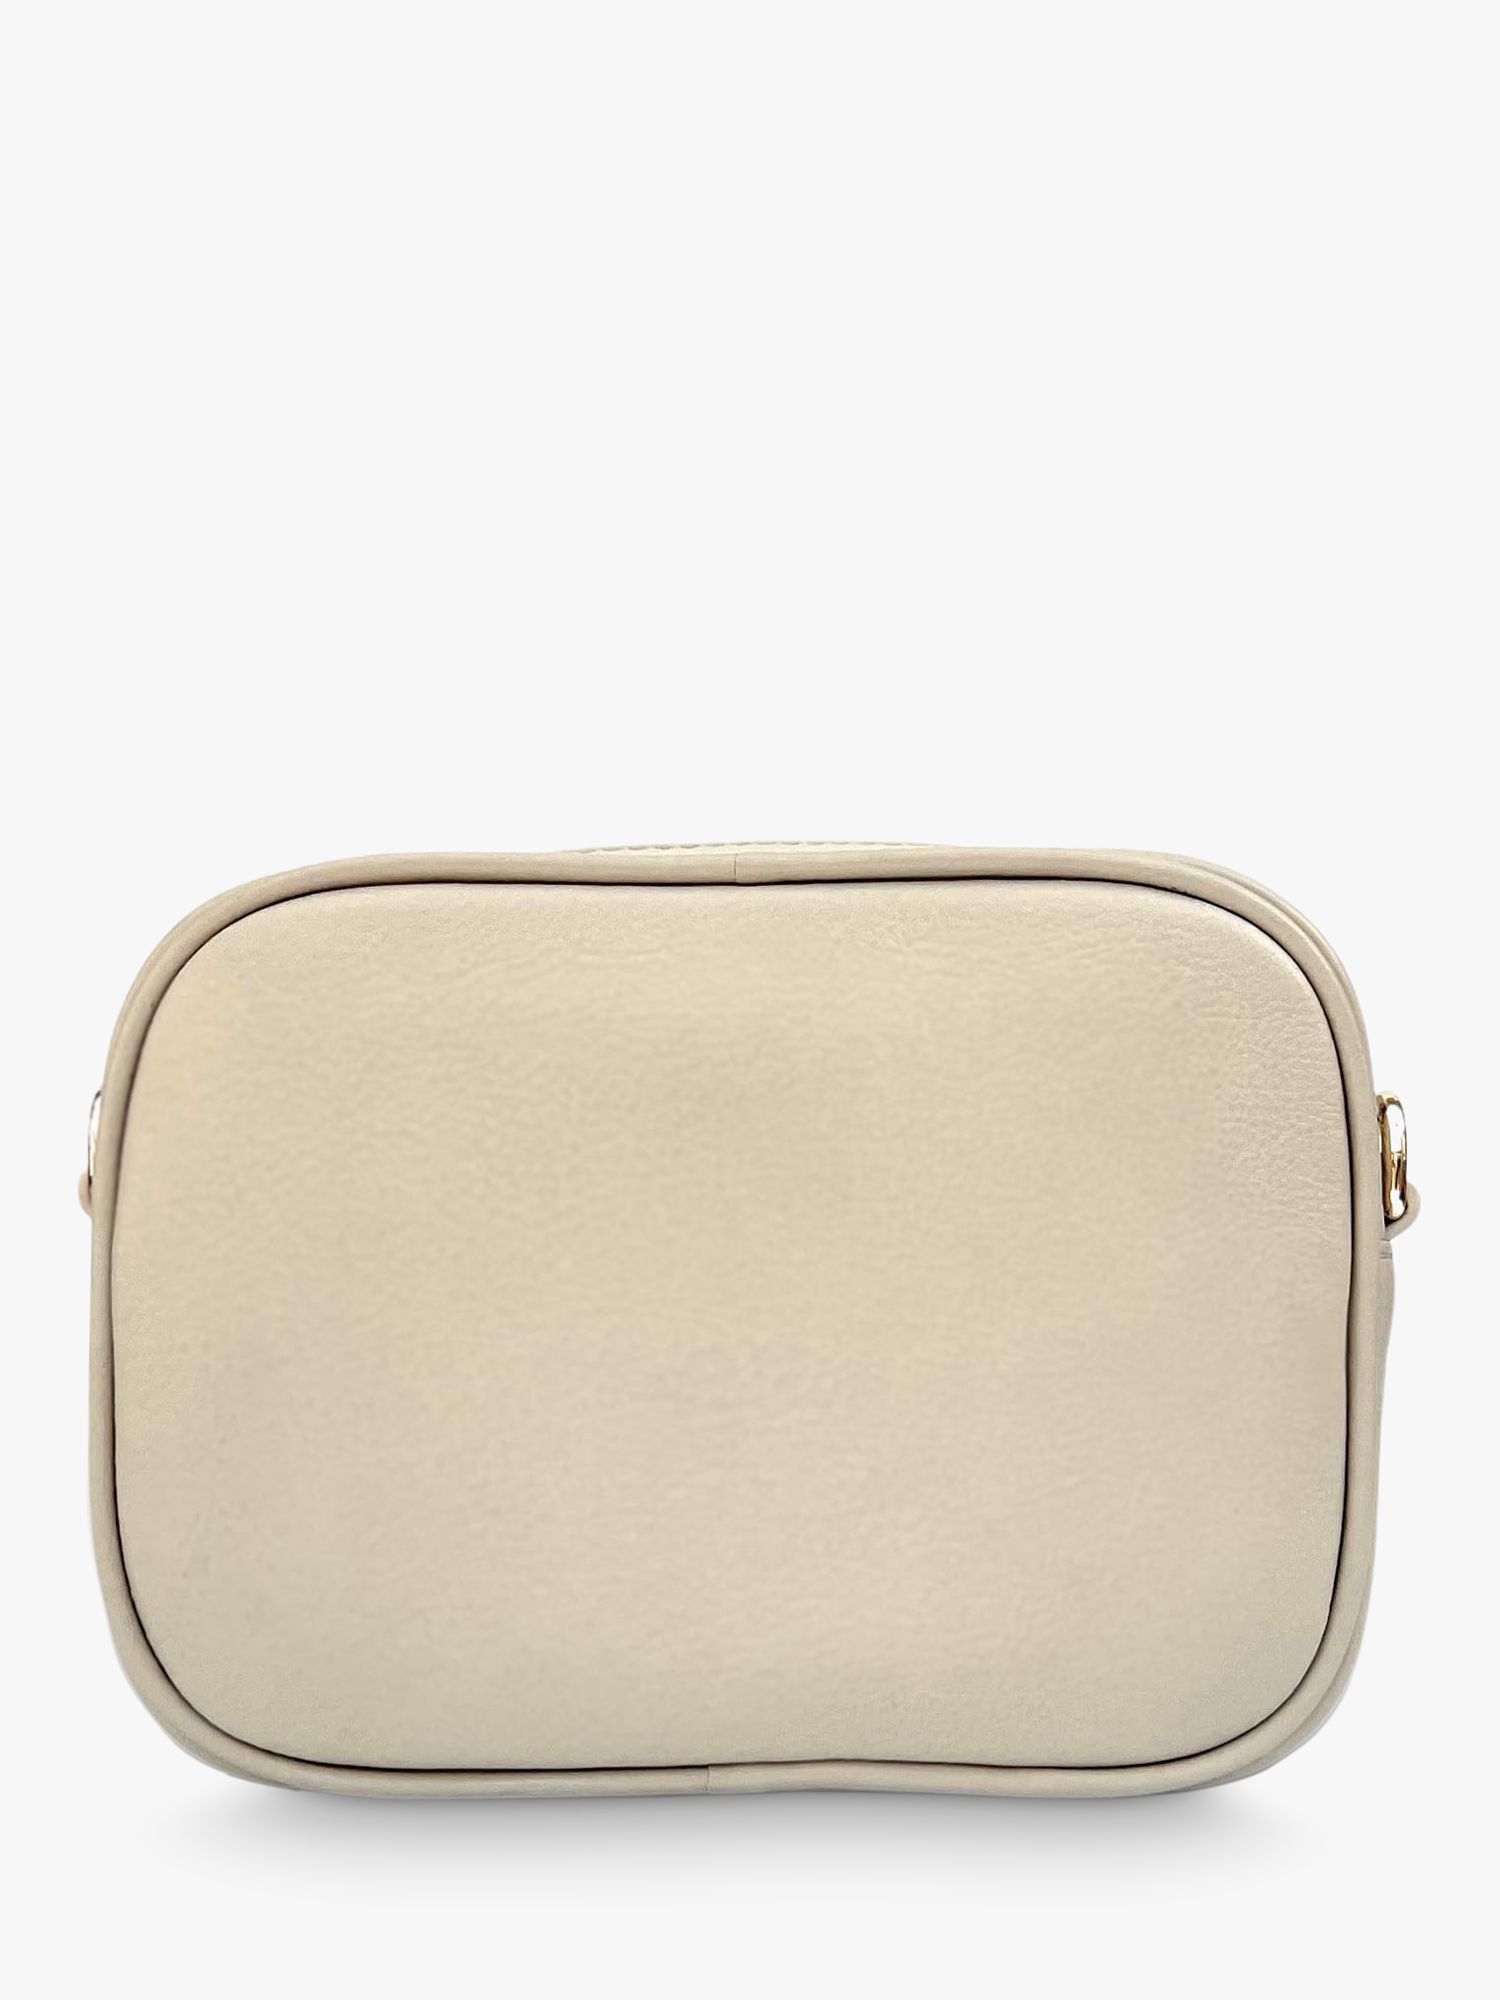 Buy Apatchy The Penelope Woven Leather Camera Bag Online at johnlewis.com